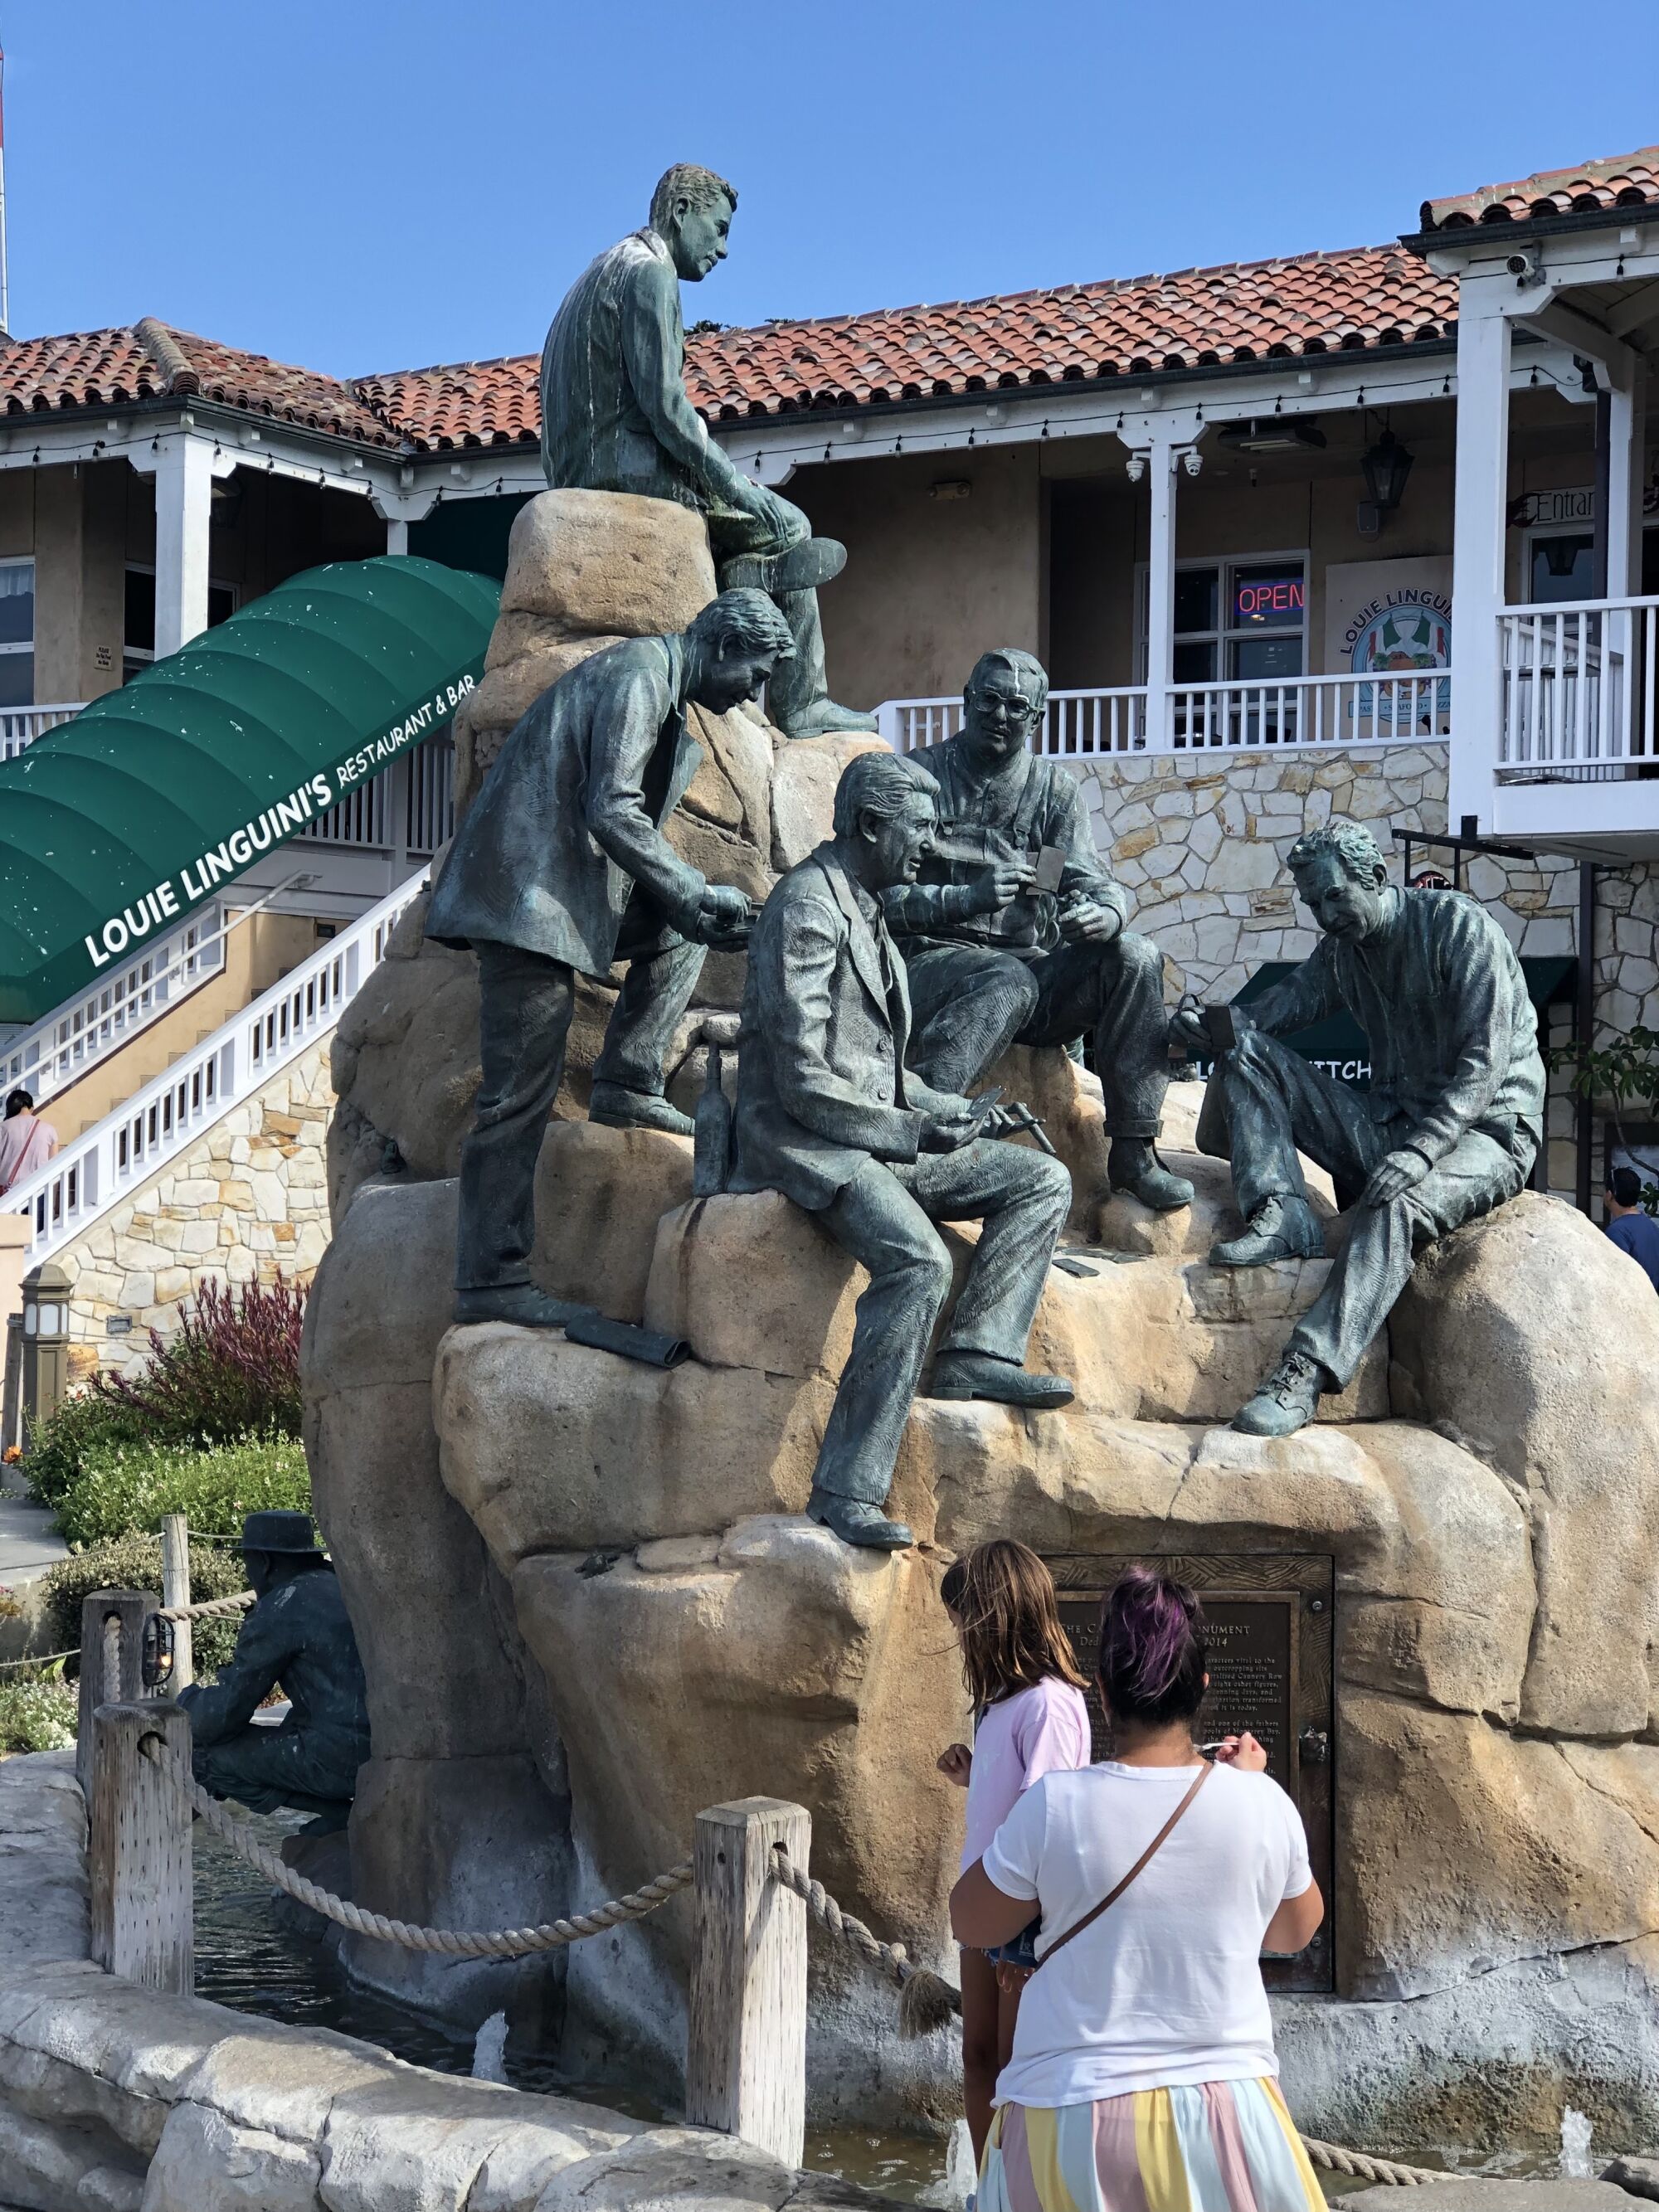 People passing a sculpture of several life-size figures on a large mound of tan boulders outside a restaurant